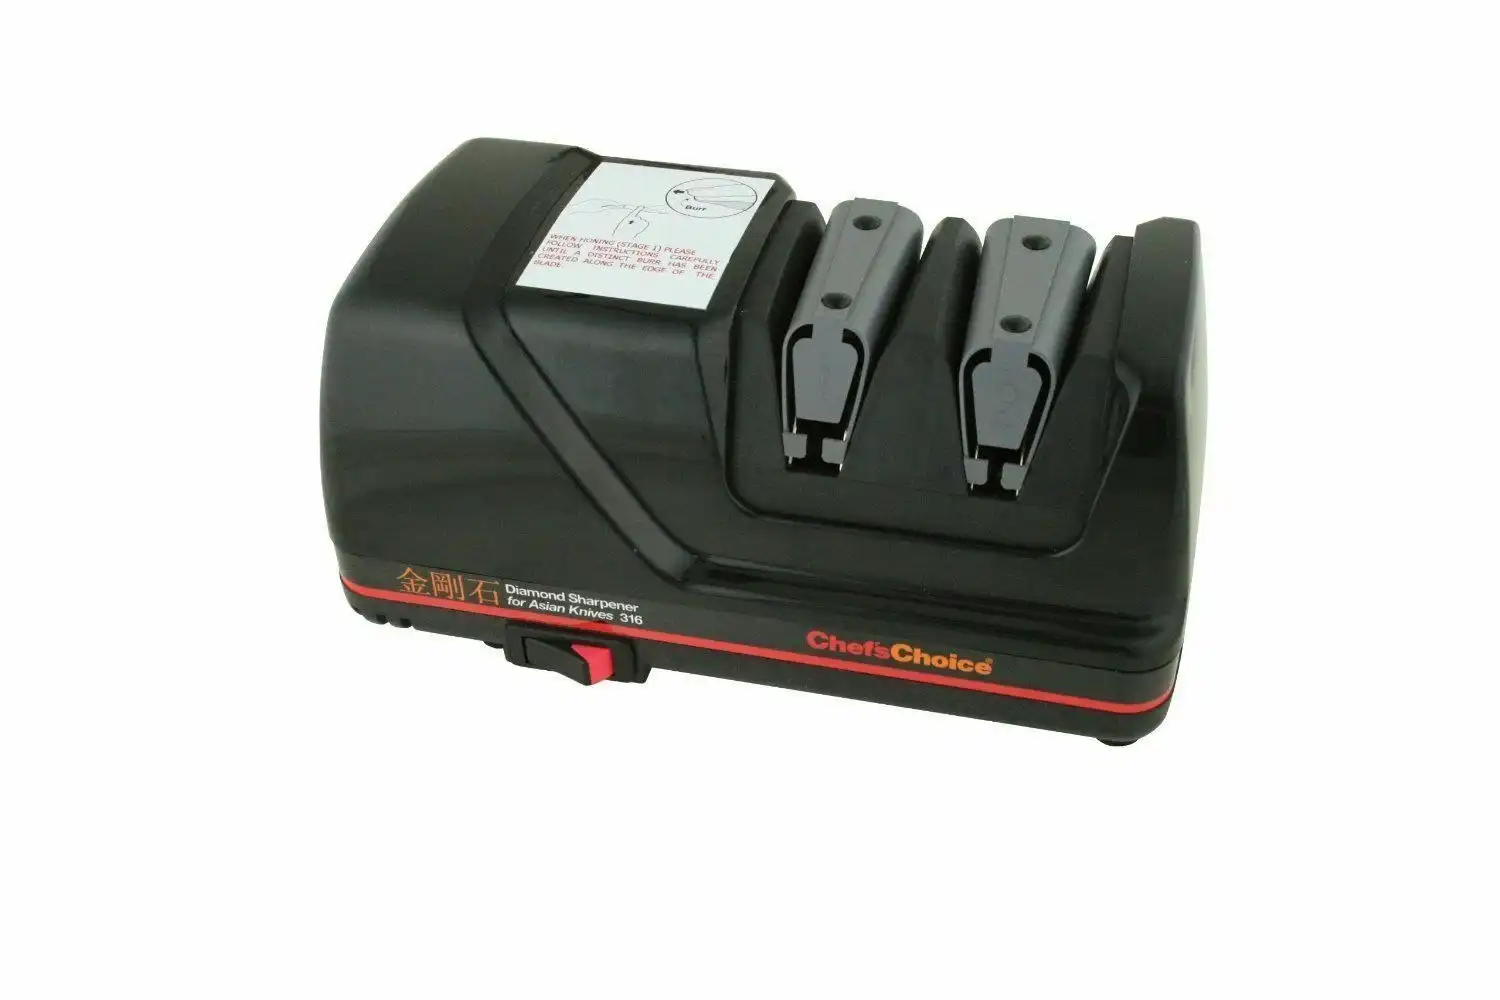 Chefs Choice Electric 316 Diamond Sharpener for Asian Knives Sharpening Chef